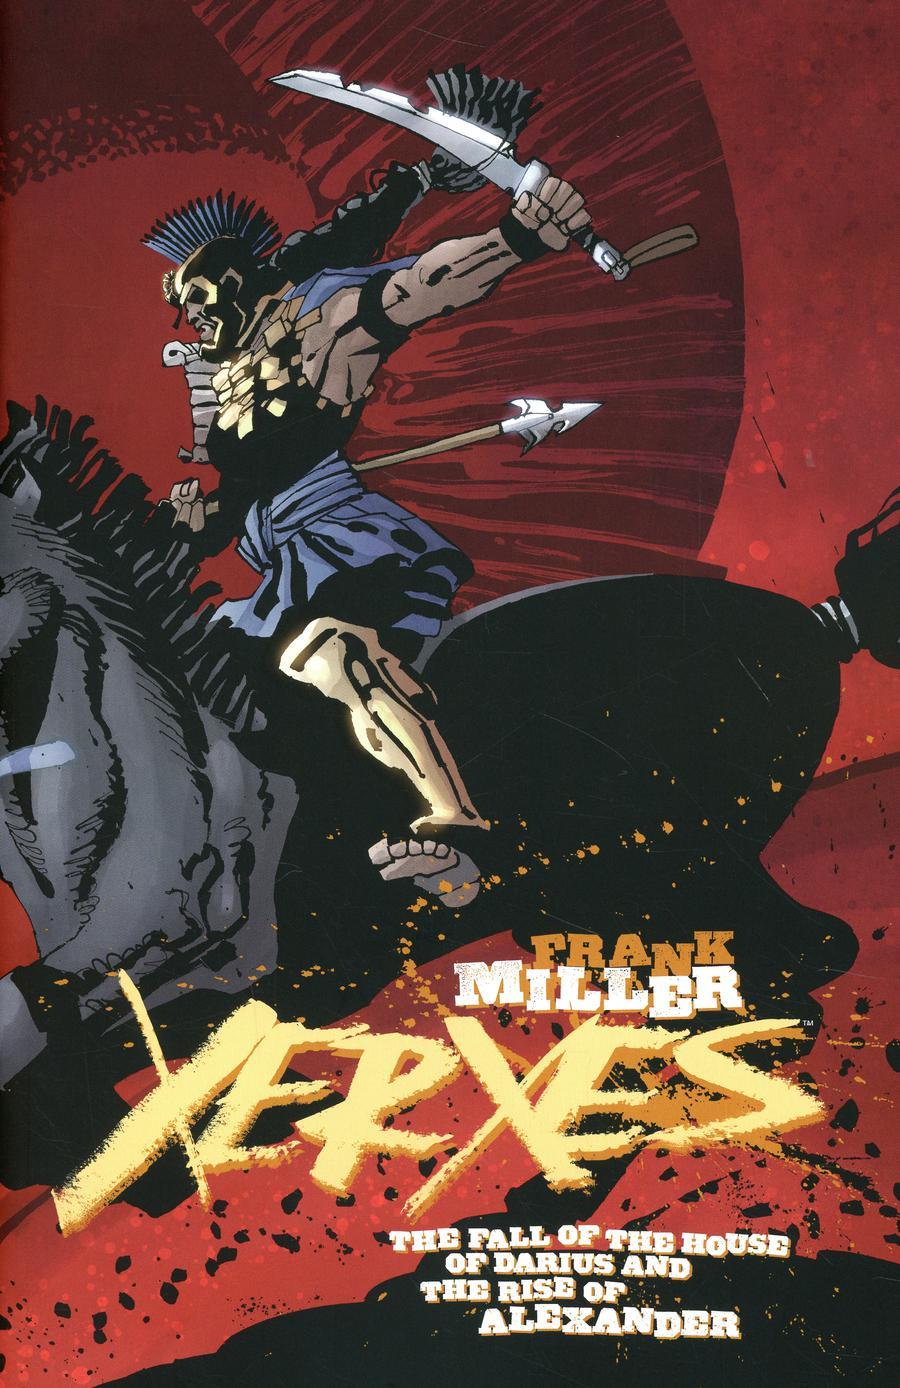 Xerxes Fall Of The House Of Darius And The Rise Of Alexander Vol. 1 #5